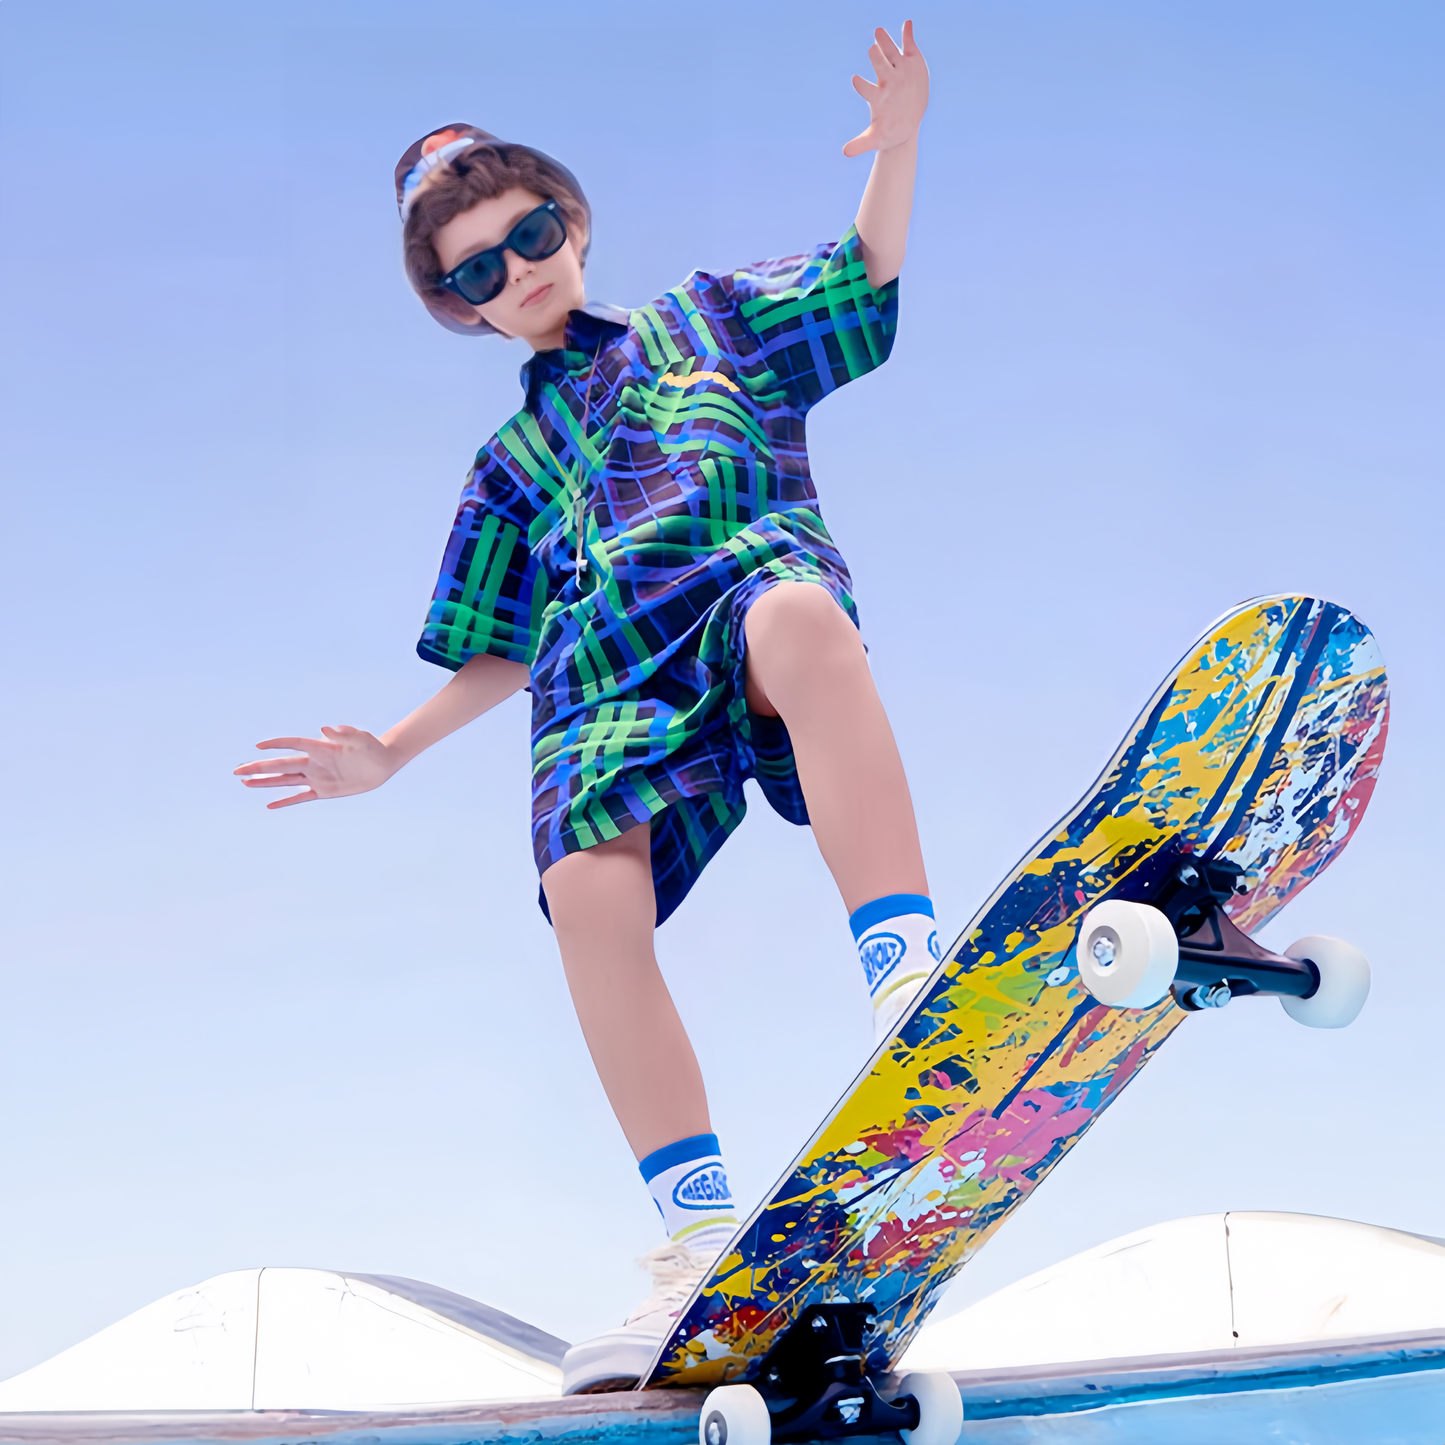 COOGHI standard skateboard for youth and adults